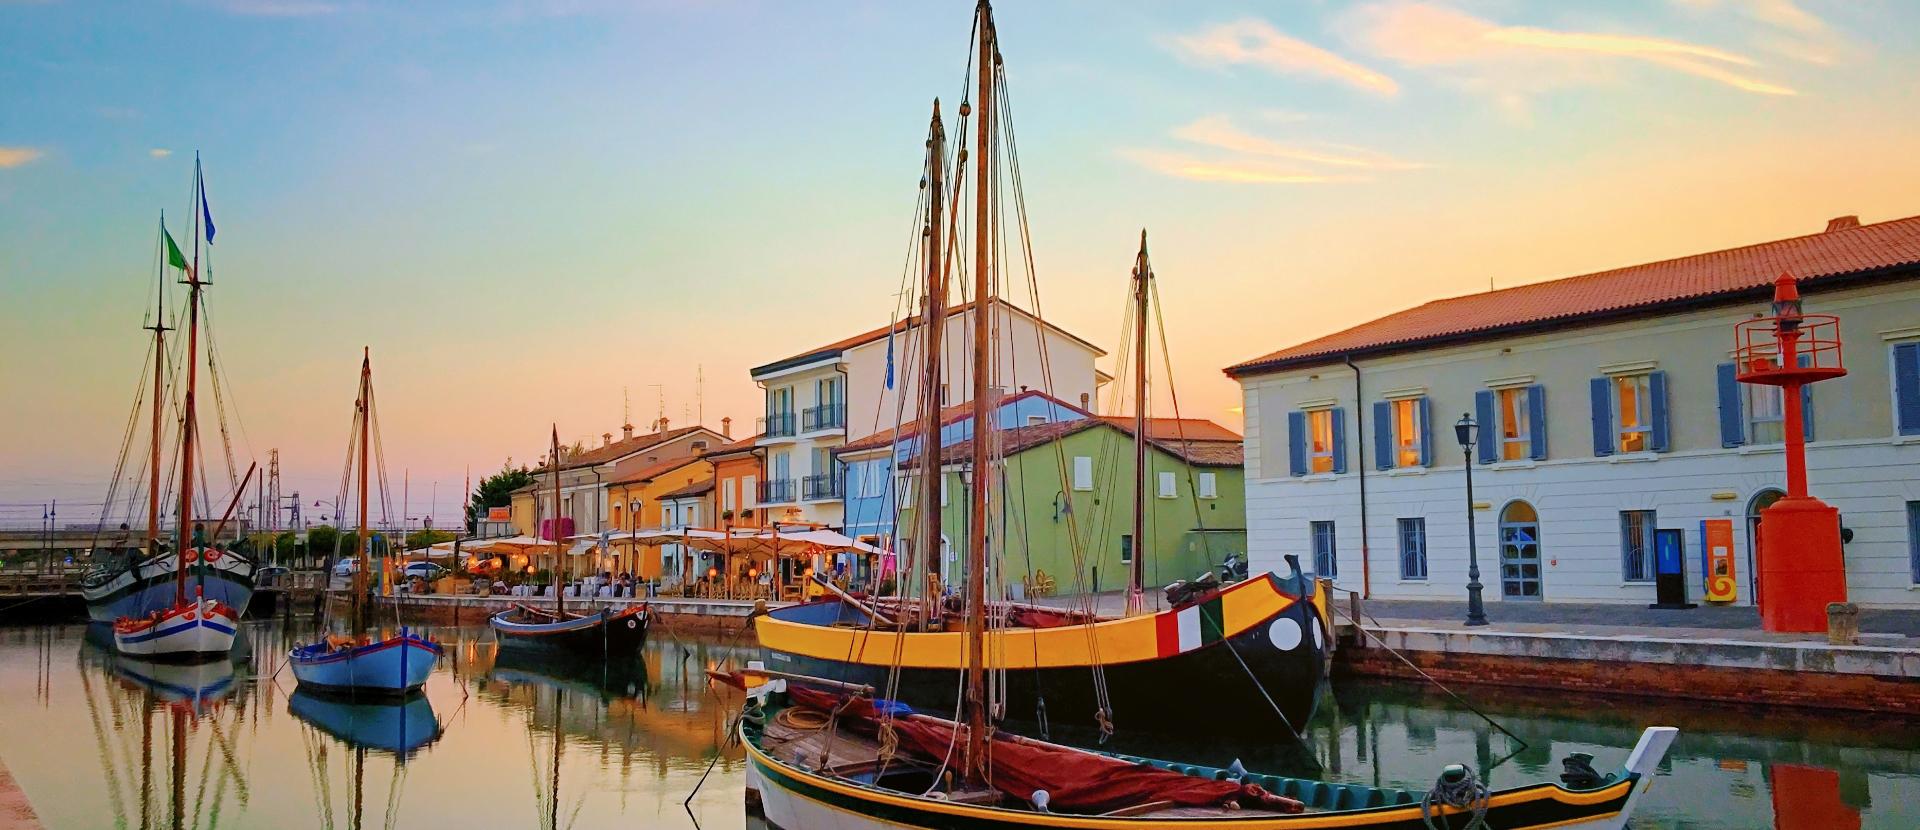 campingcesenatico en june-offer-cesenatico-in-campsite-with-swimming-pool-entertainment-and-children-free-of-charge 031